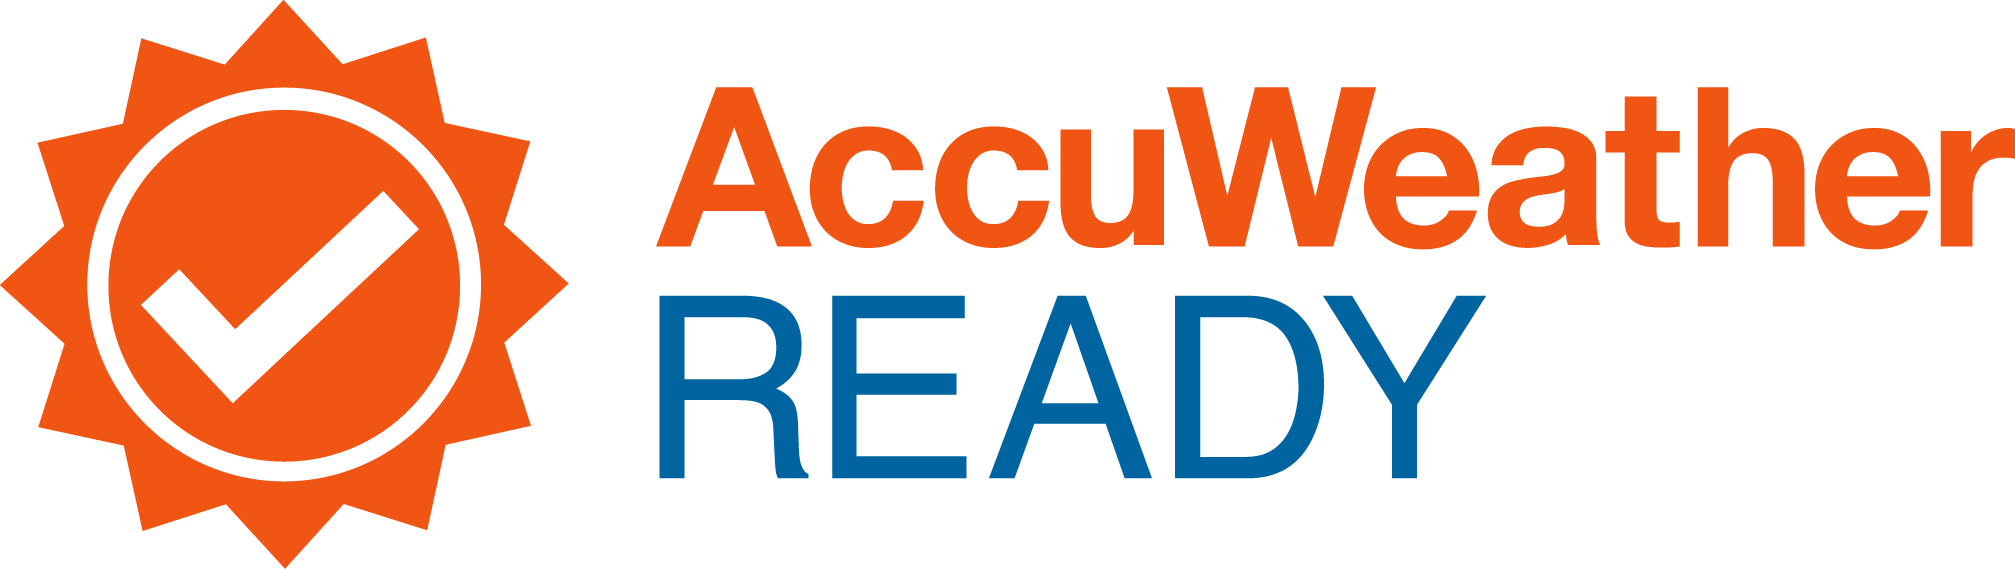 Accuweather.com Logo - How to drive safely when roads are covered with snow and ice